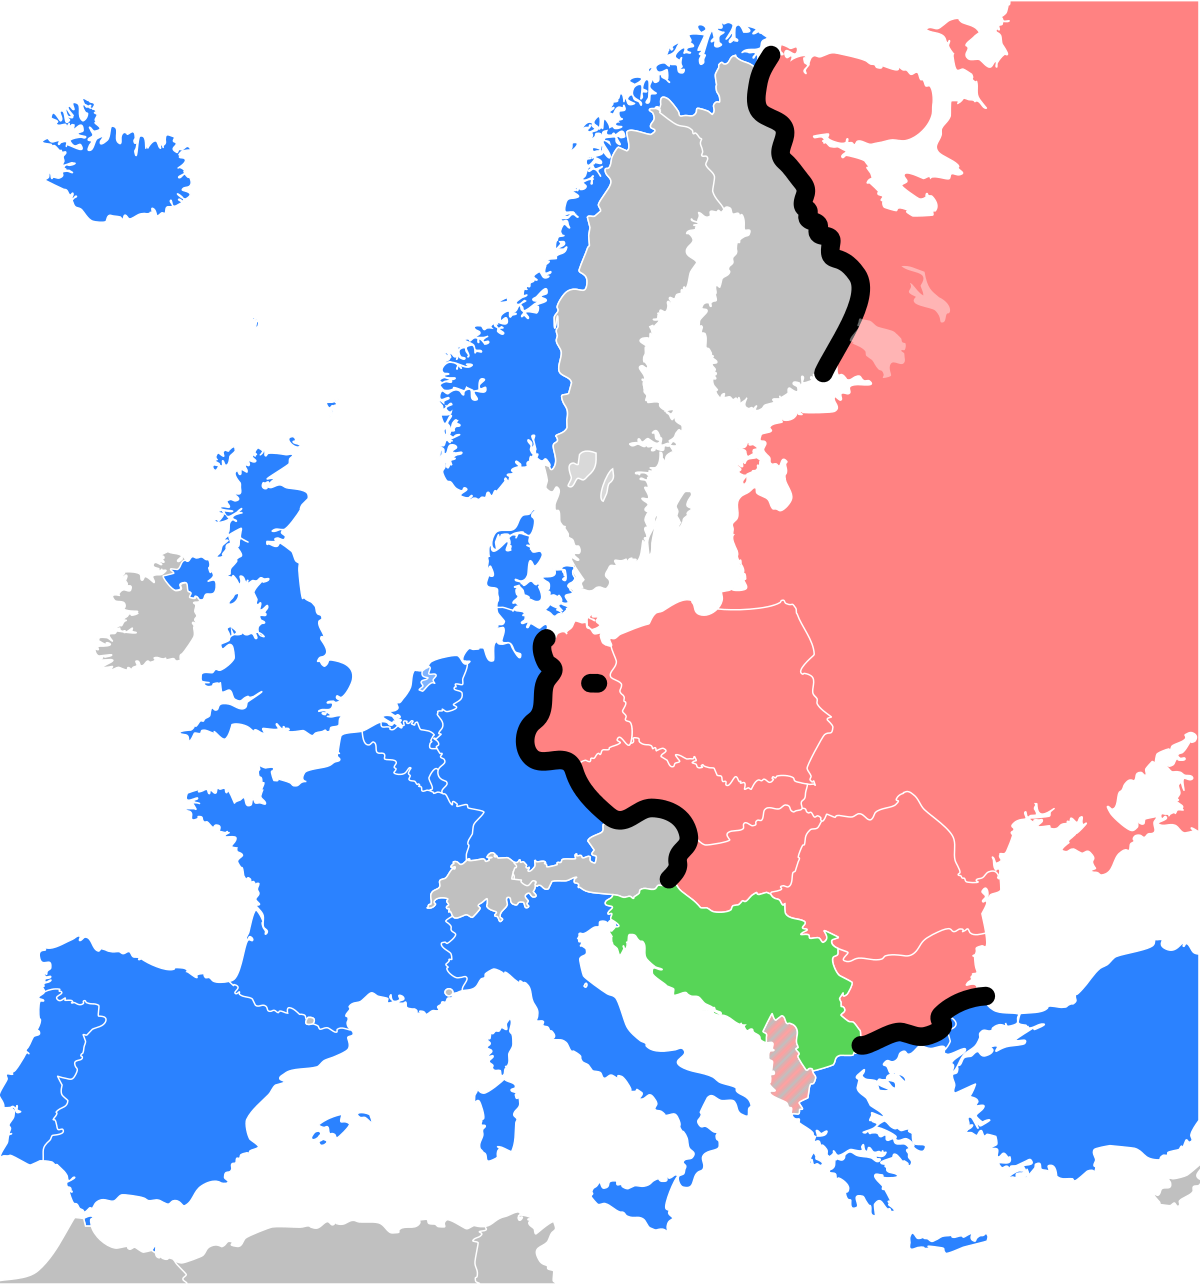 Post-WW II Europe divided by Iron Curtain into military and political blocs (Spain joined NATO in 1982, after the transition from Francoist dictatorship to democracy)